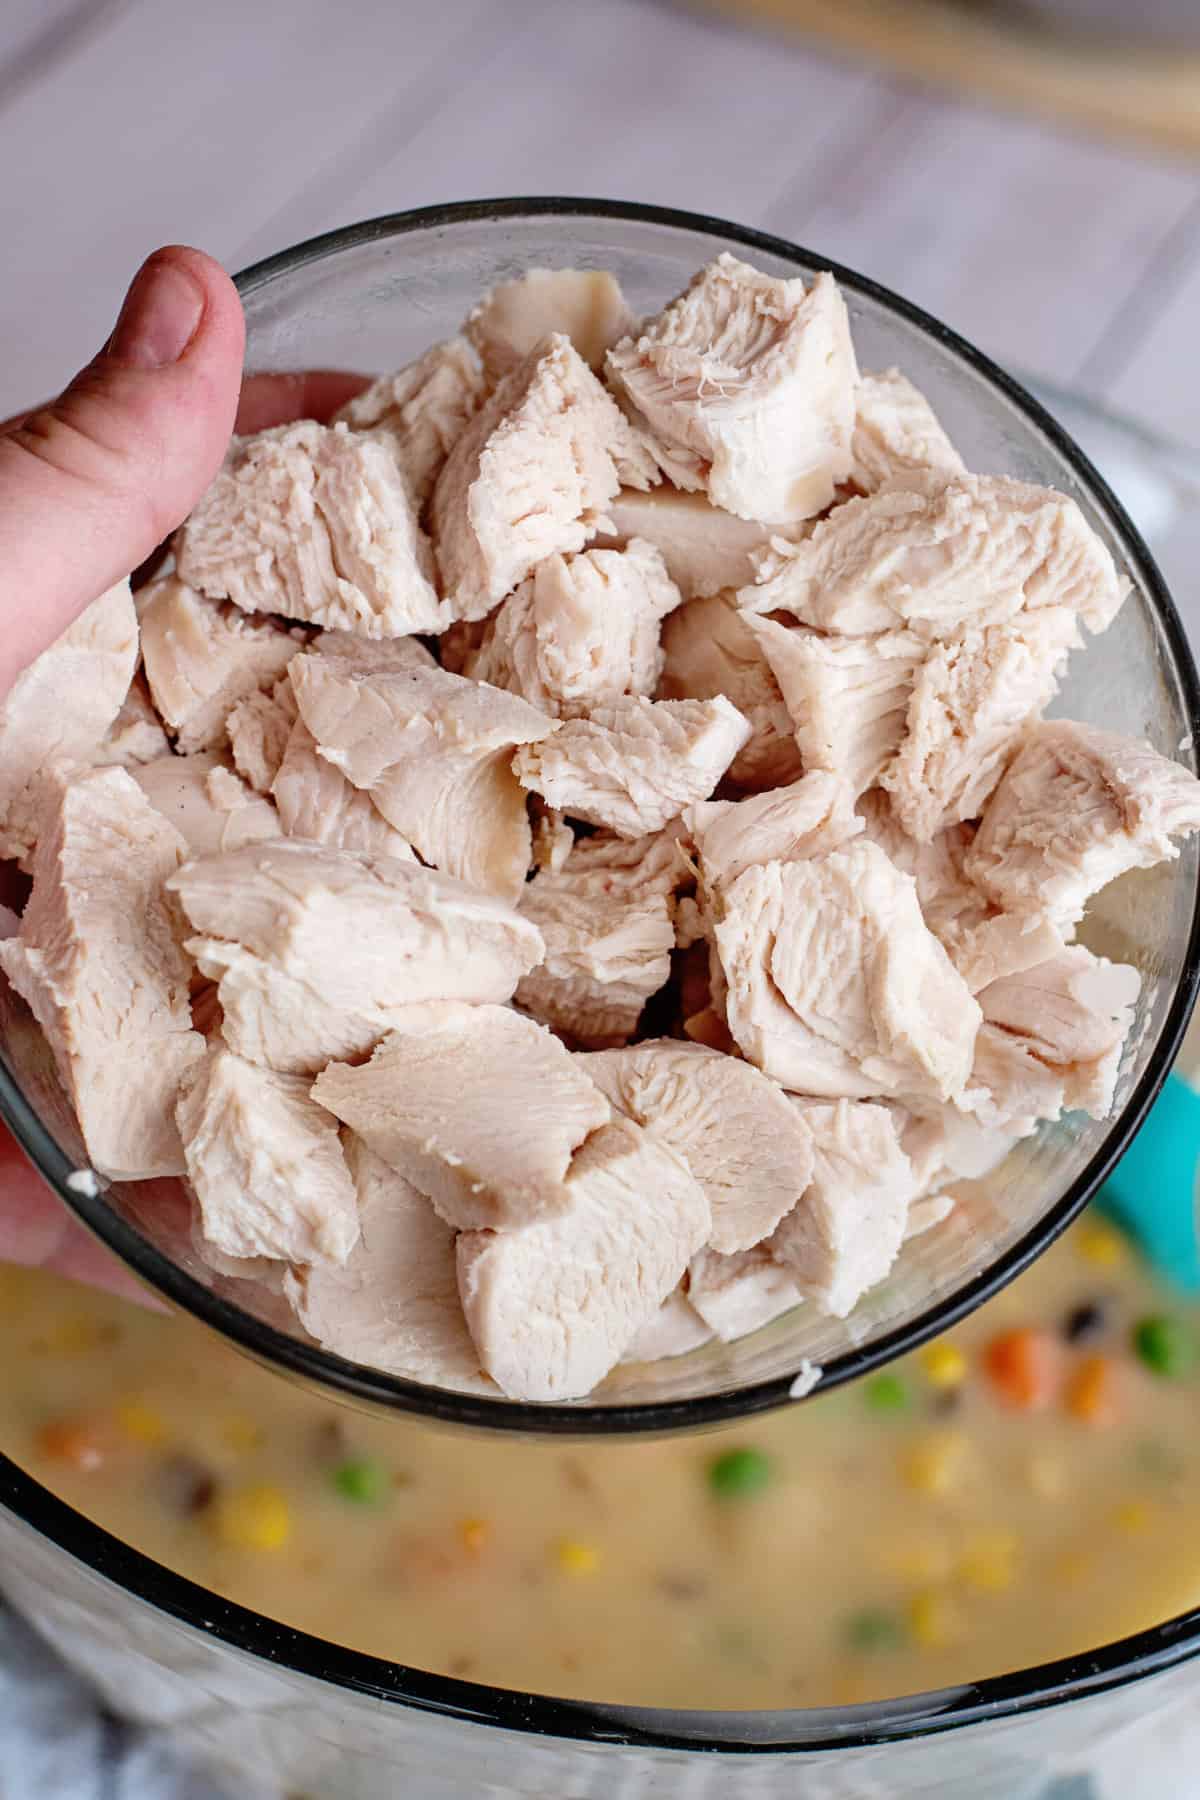 cut the chicken into bite-sized pieces